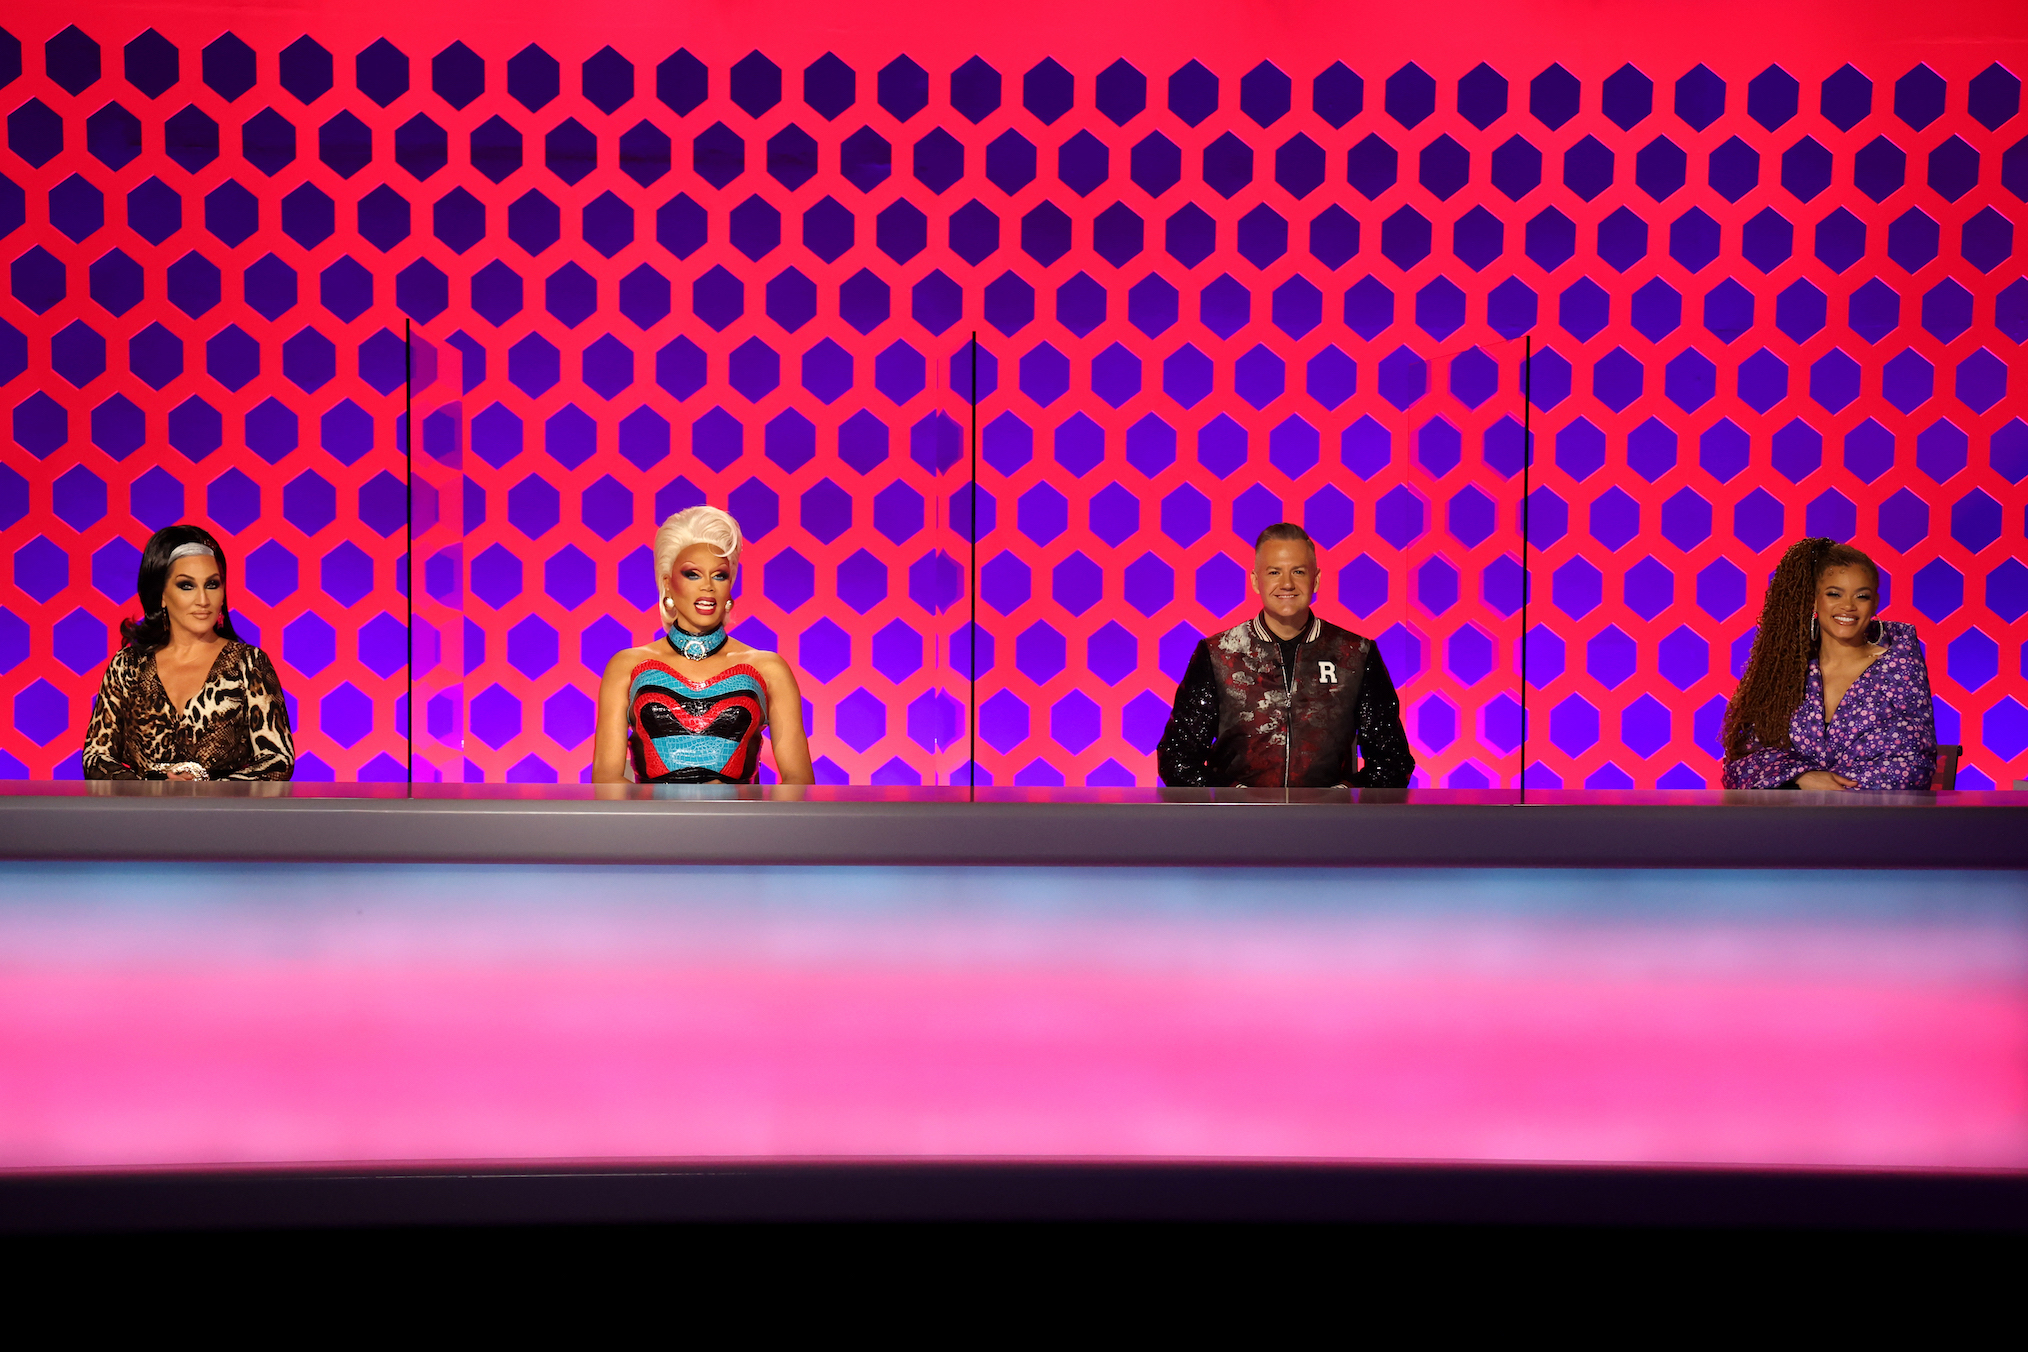 Michelle Visage, RuPaul, and other judges in 'RuPaul's Drag Race' Season 14